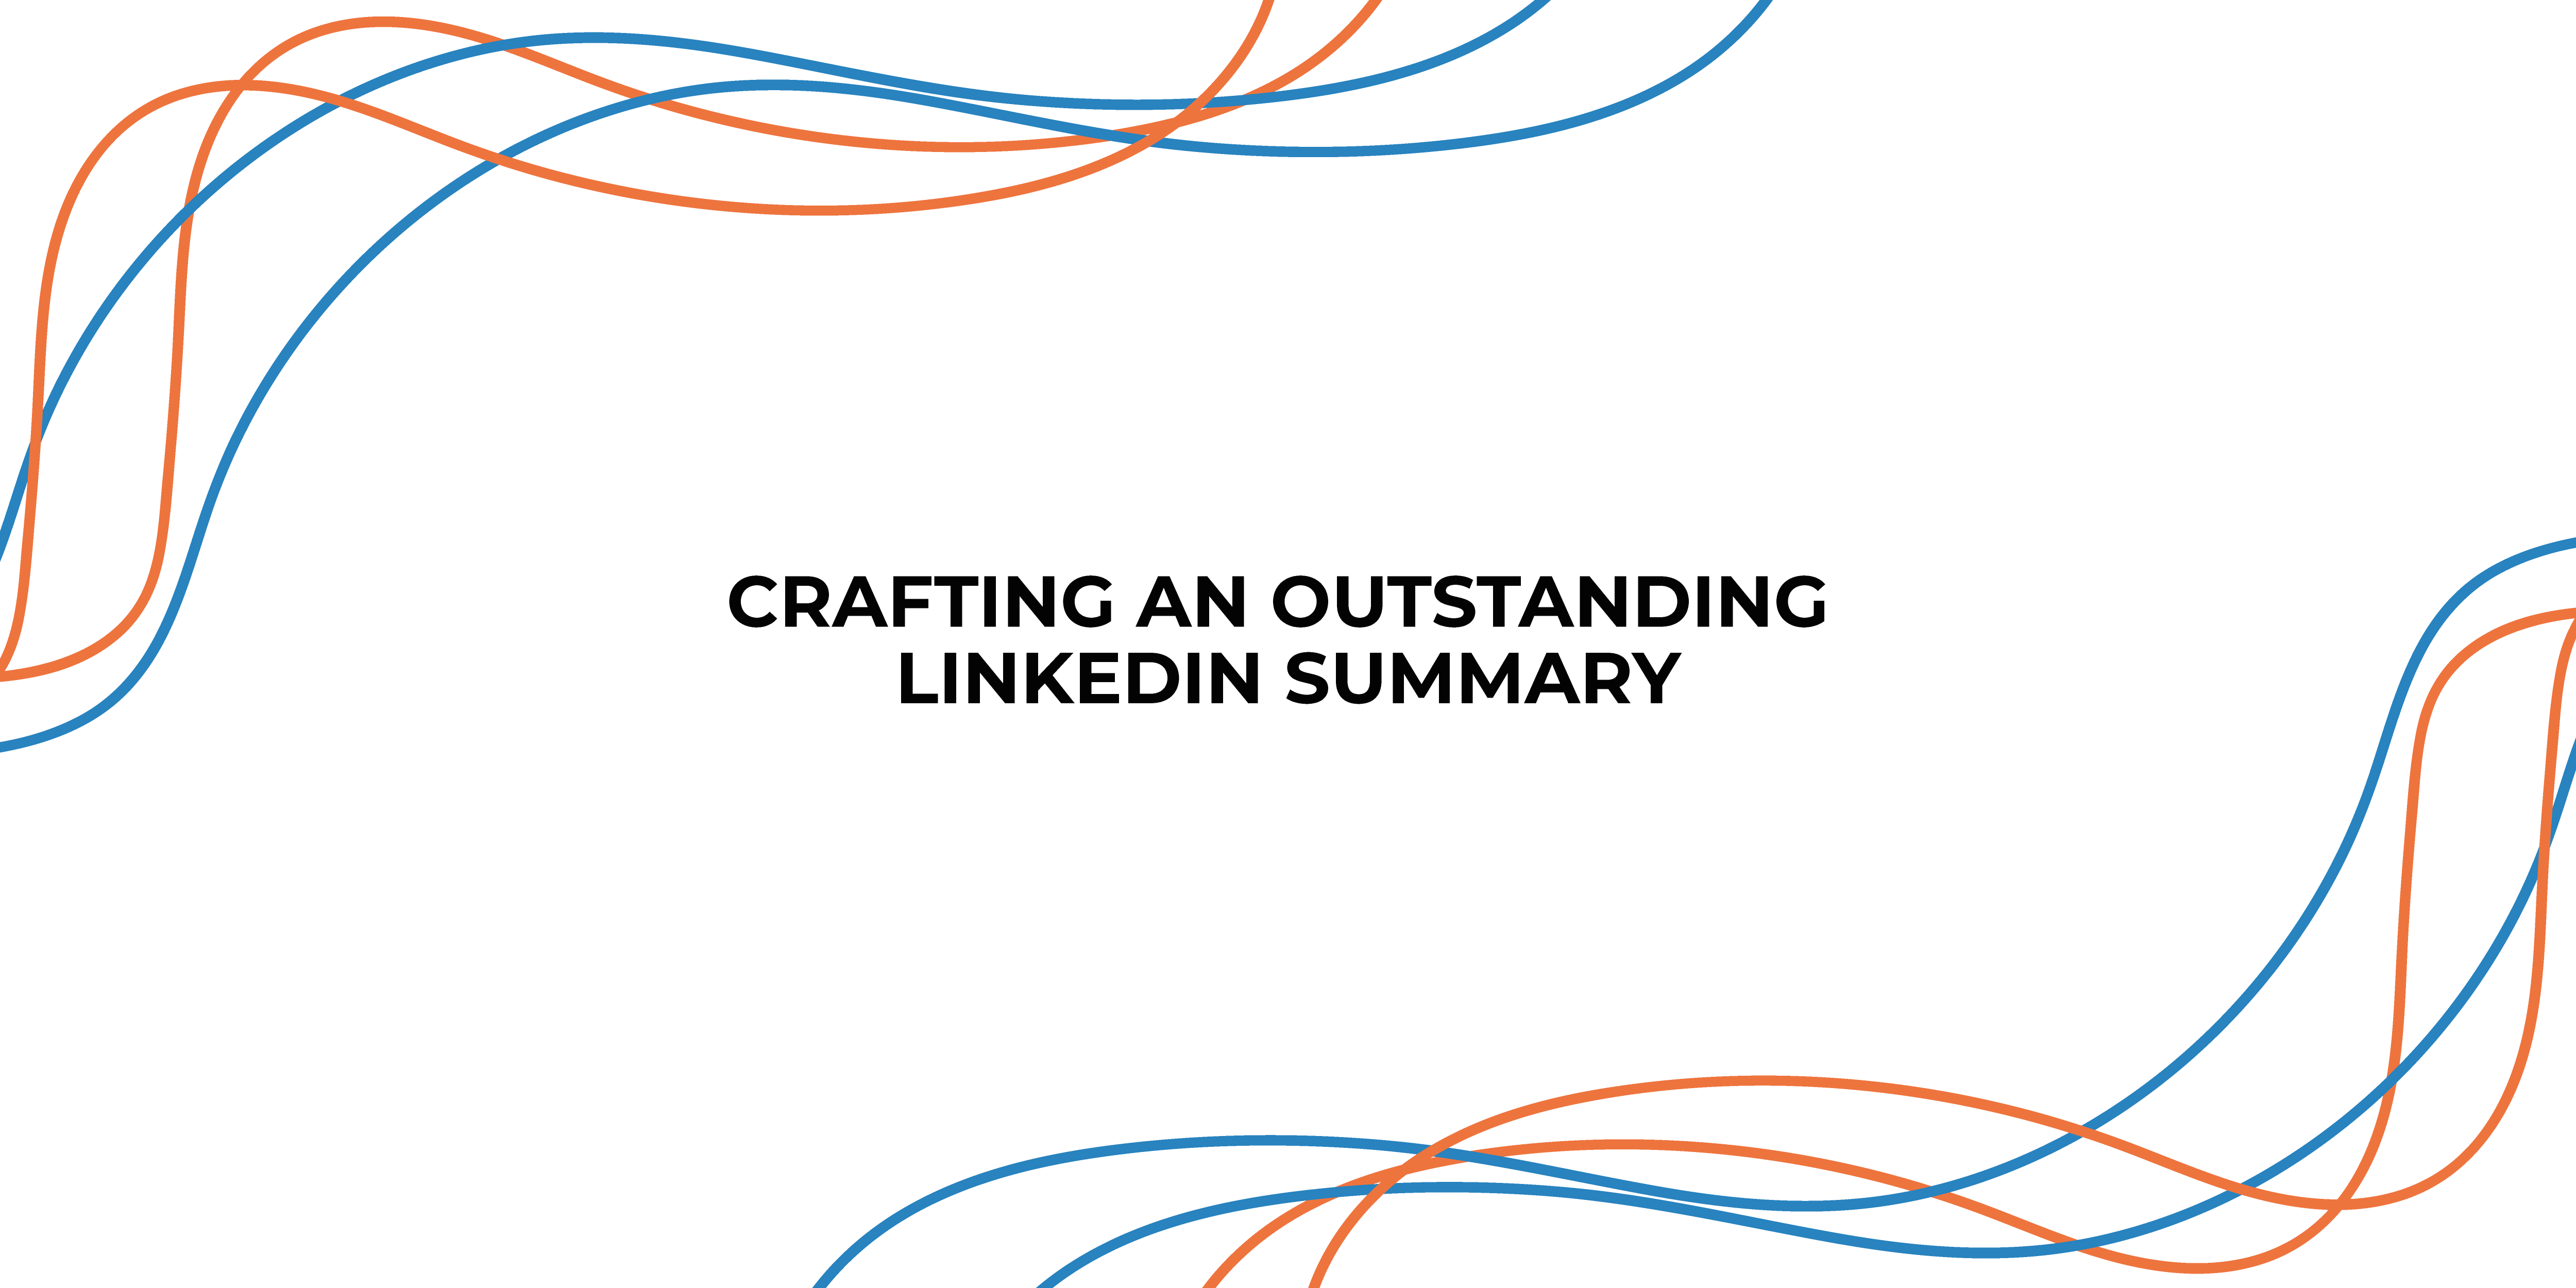 Crafting an Outstanding LinkedIn Summary